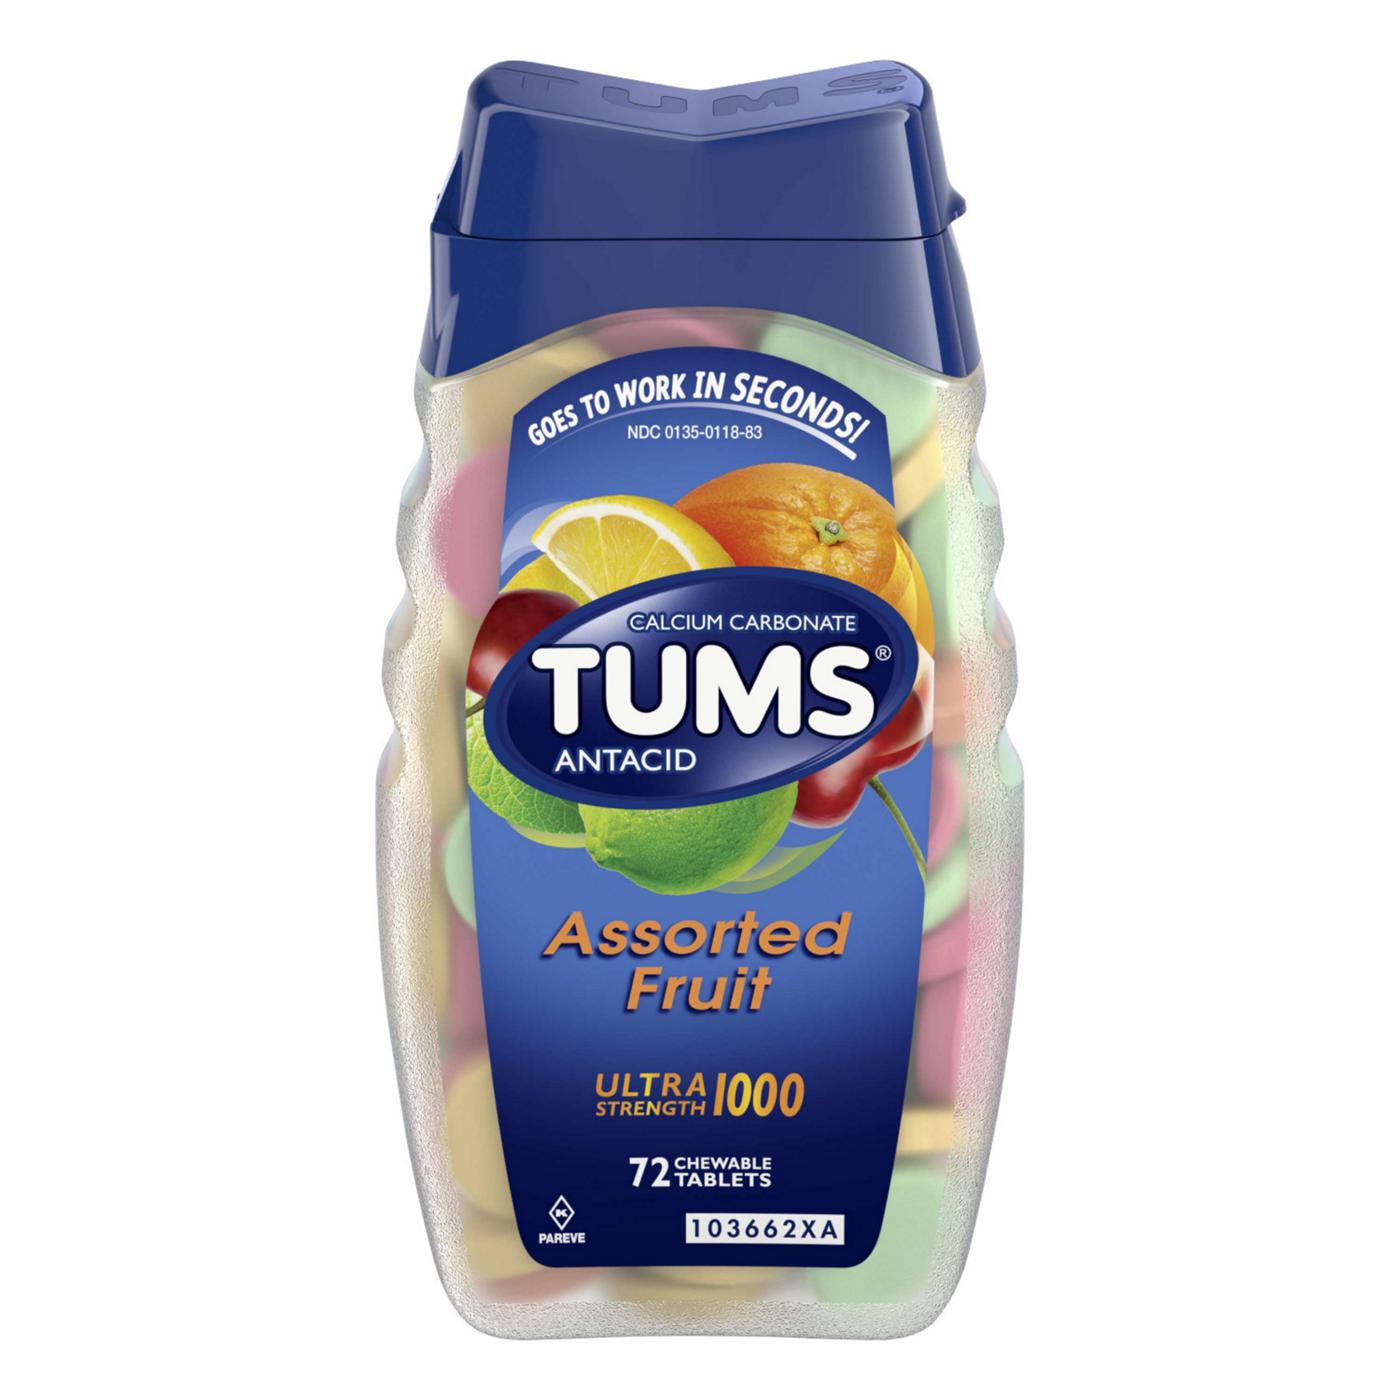 Tums Ultra Strength Antacid Tablets; image 1 of 8